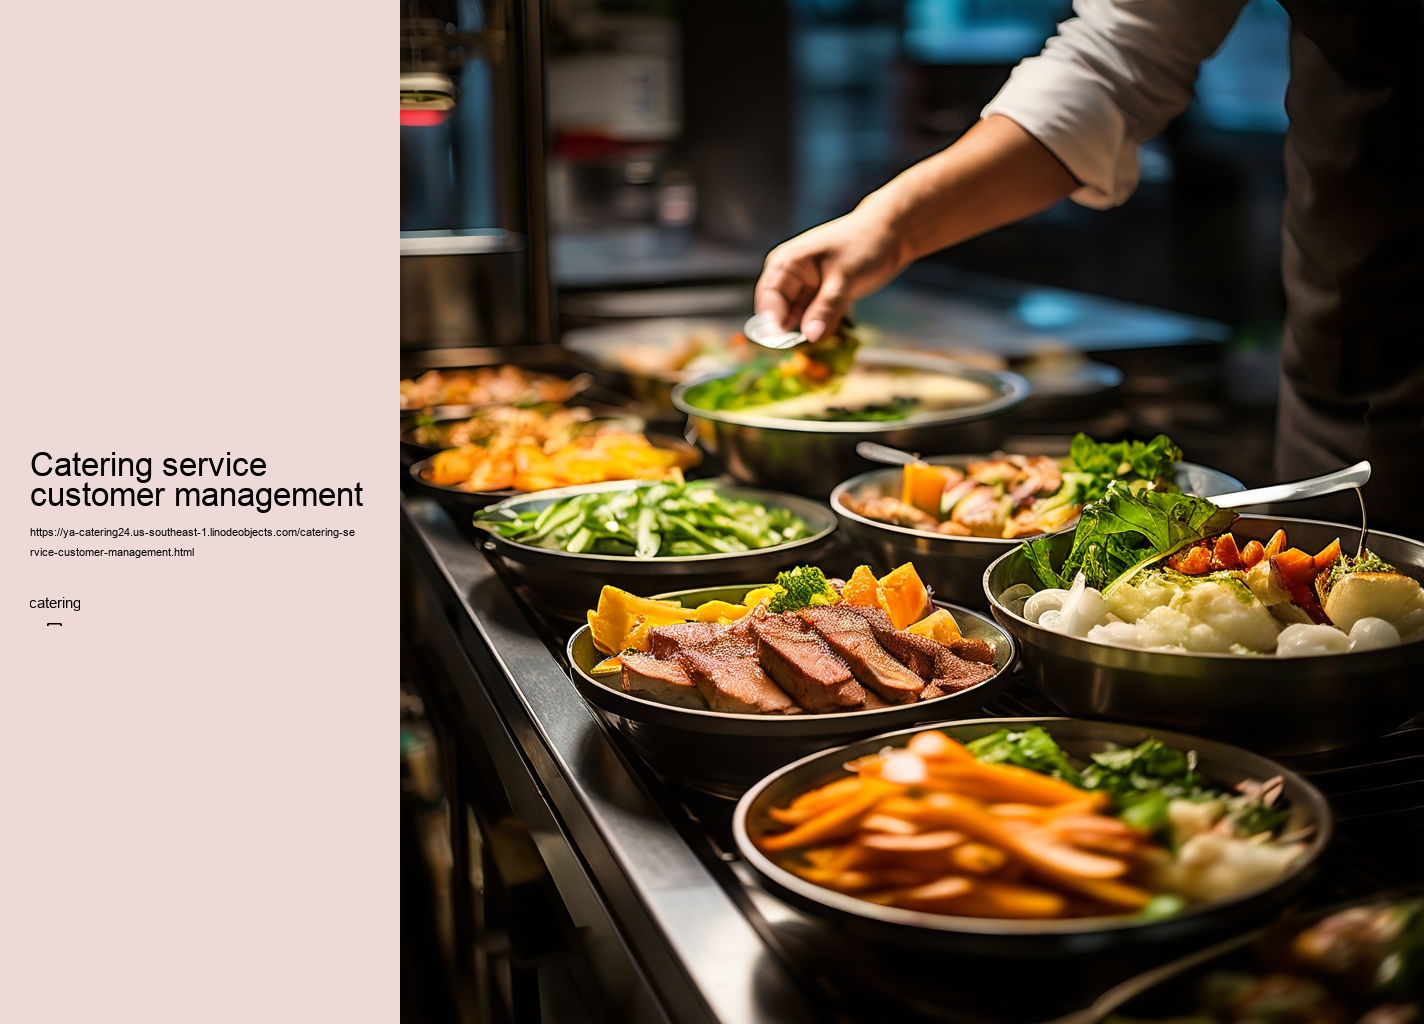 Catering service customer management